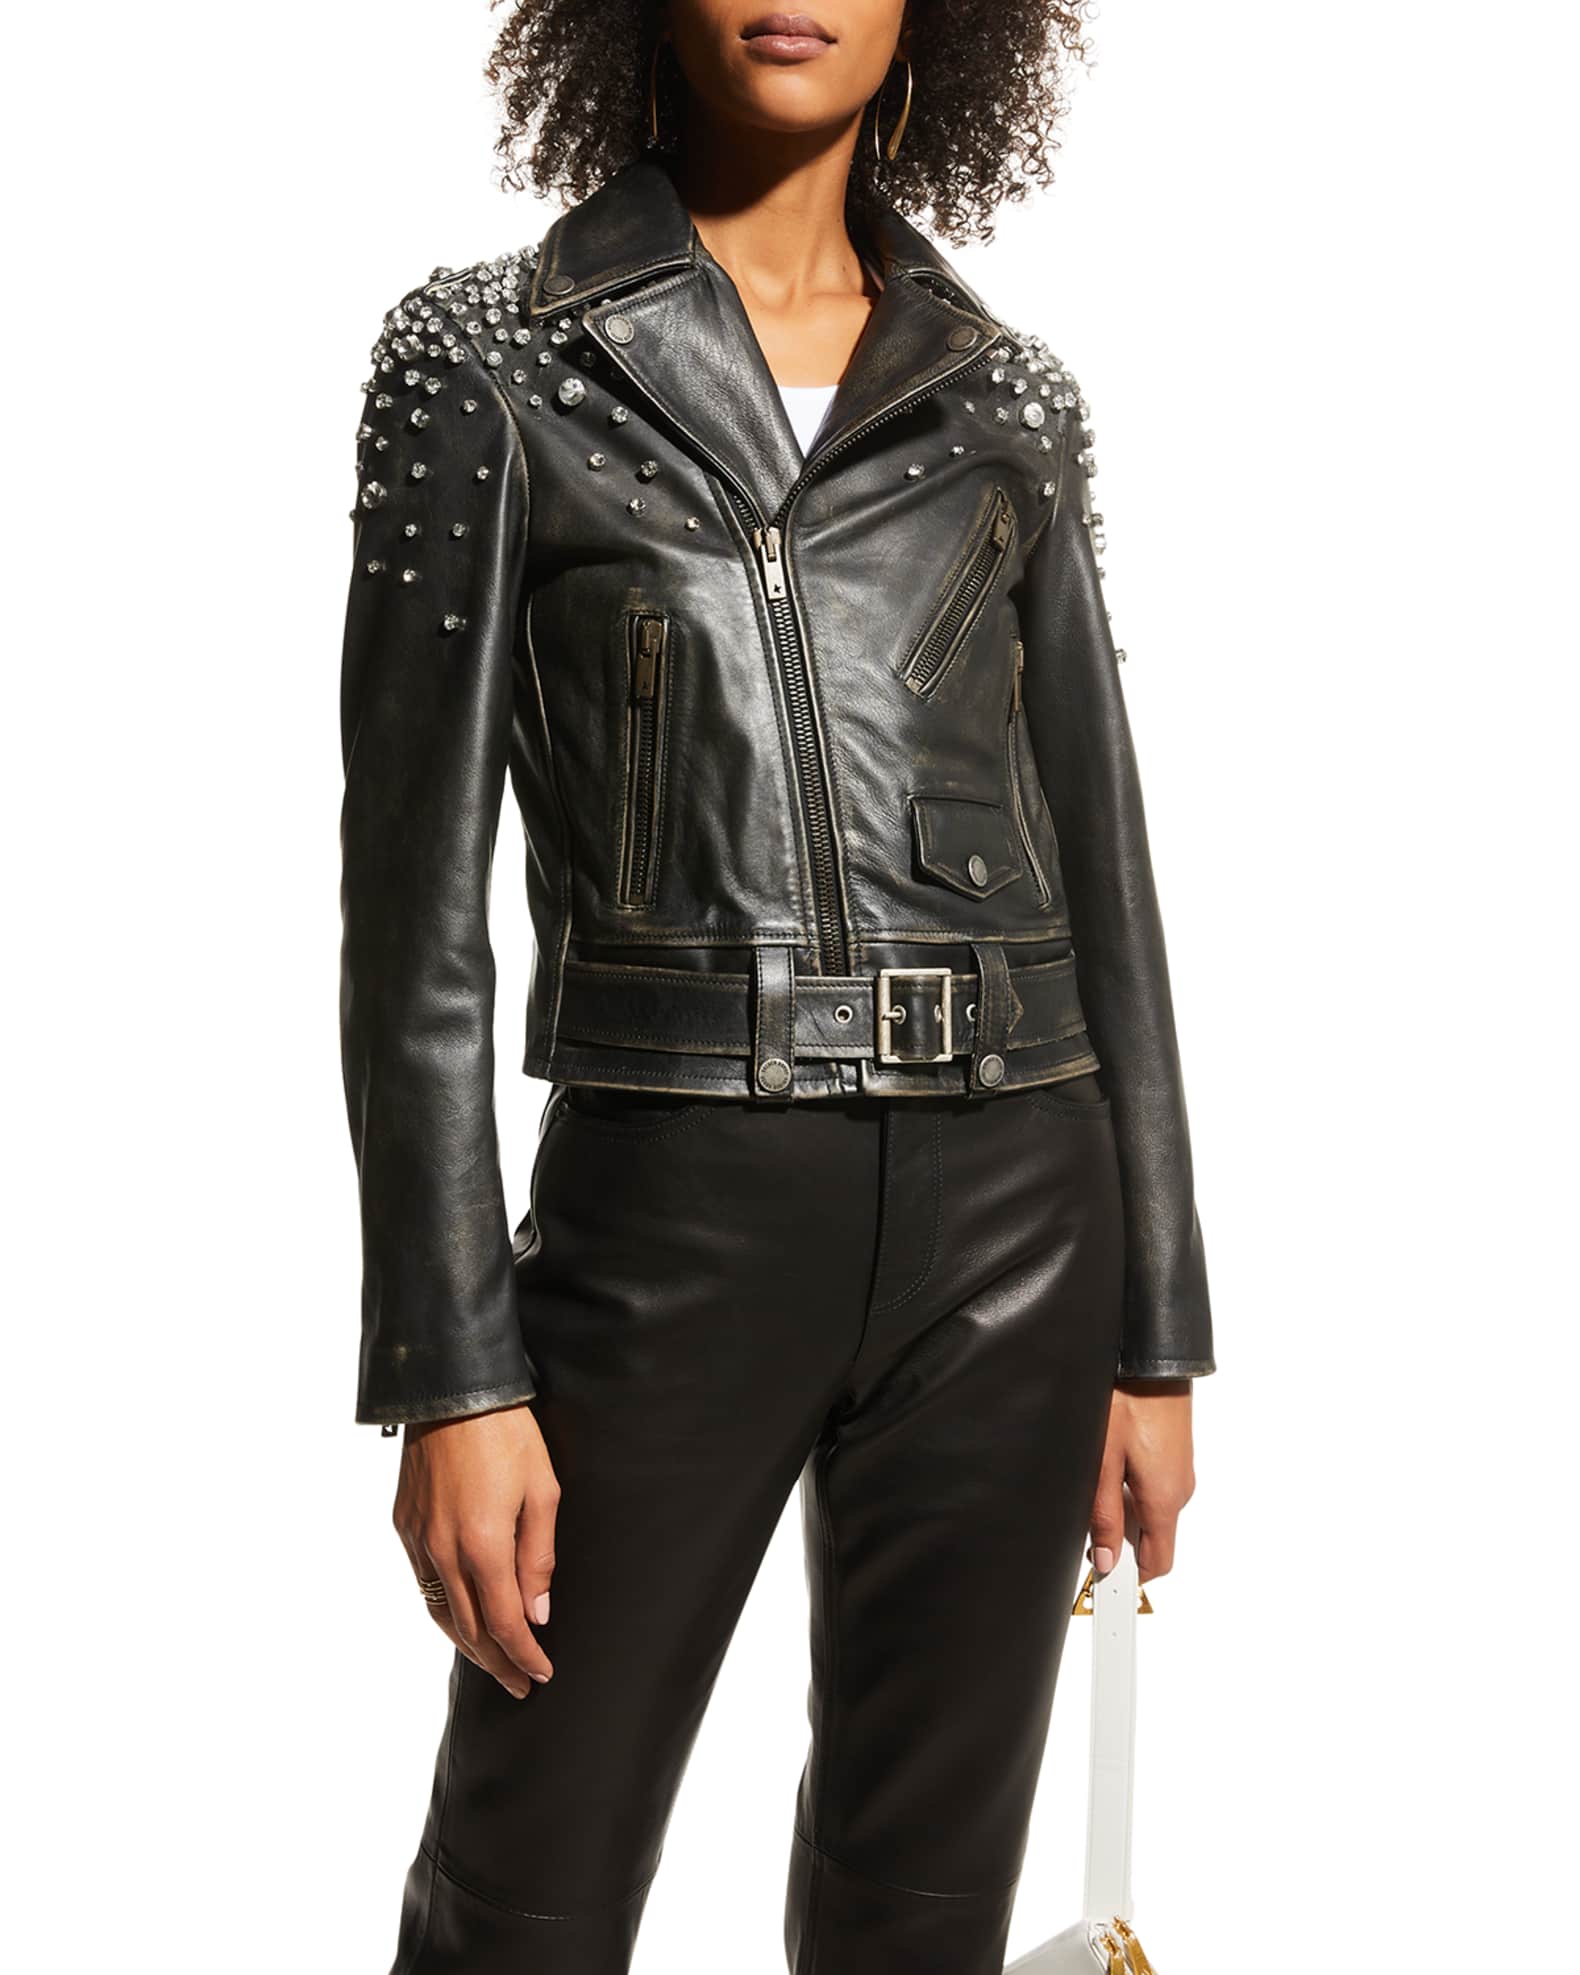 Women's distressed leather biker jacket with animal print